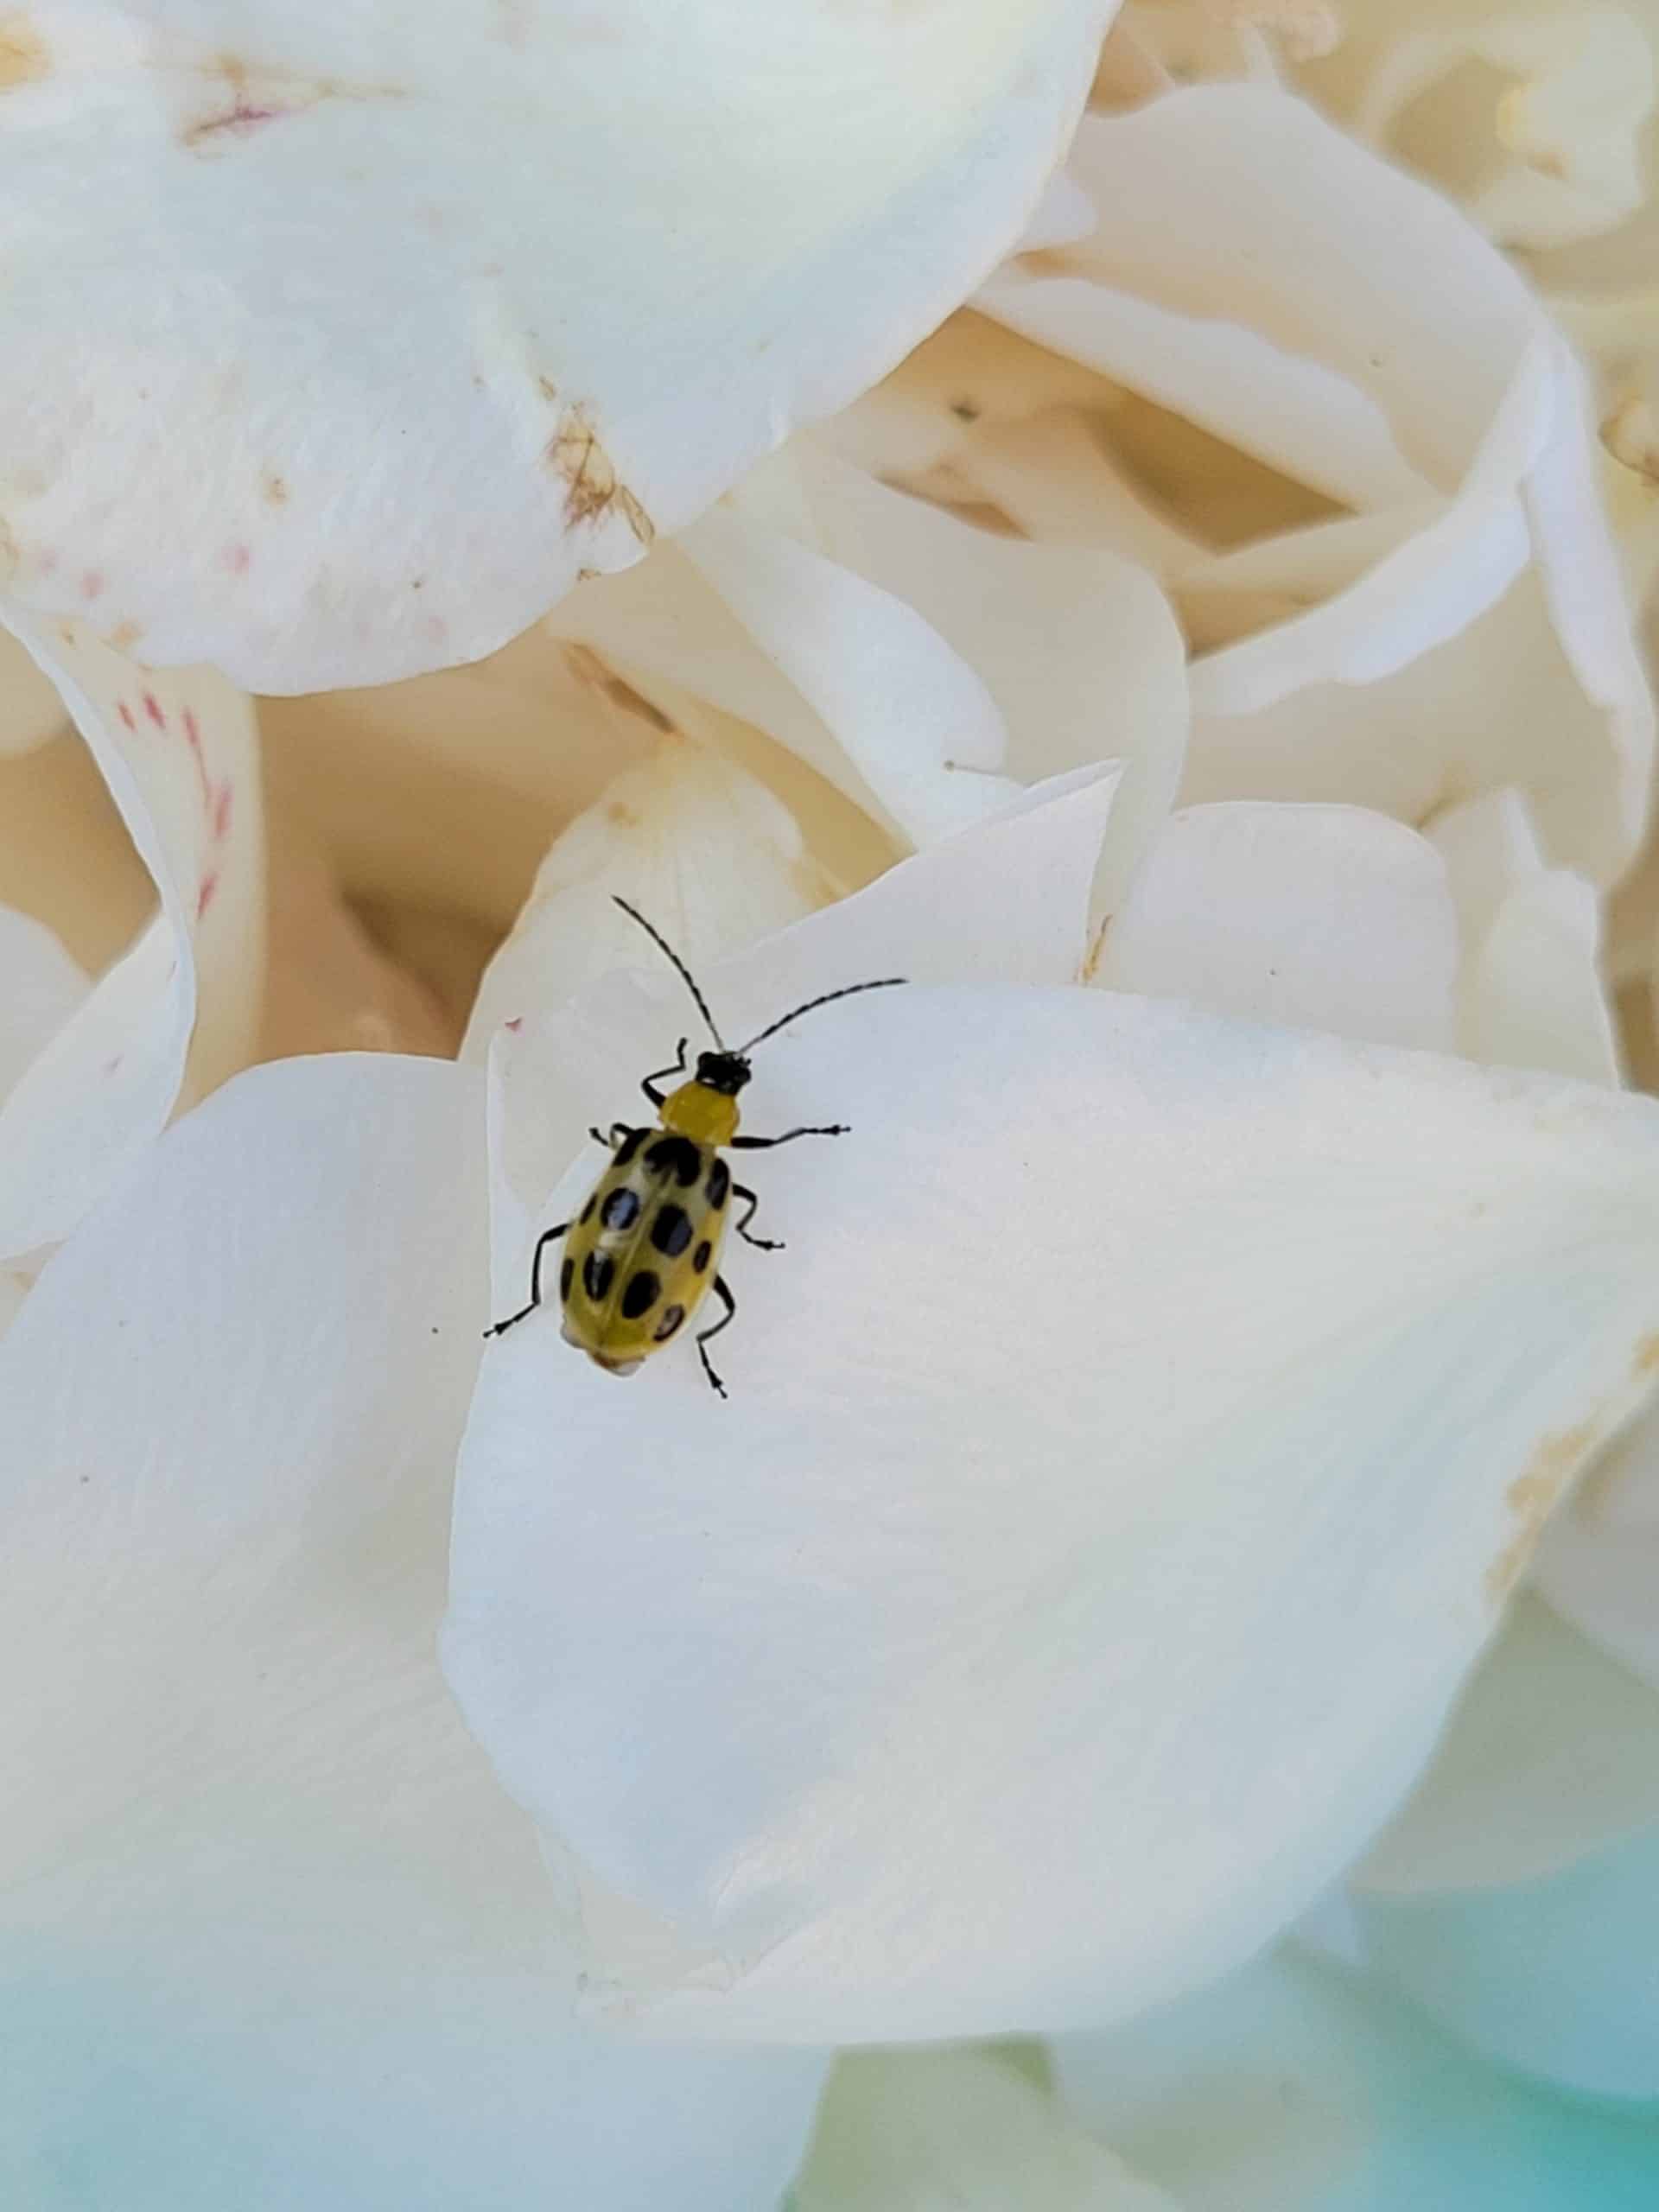 A spotted cucumber beetle on the rose petal it had been chewing